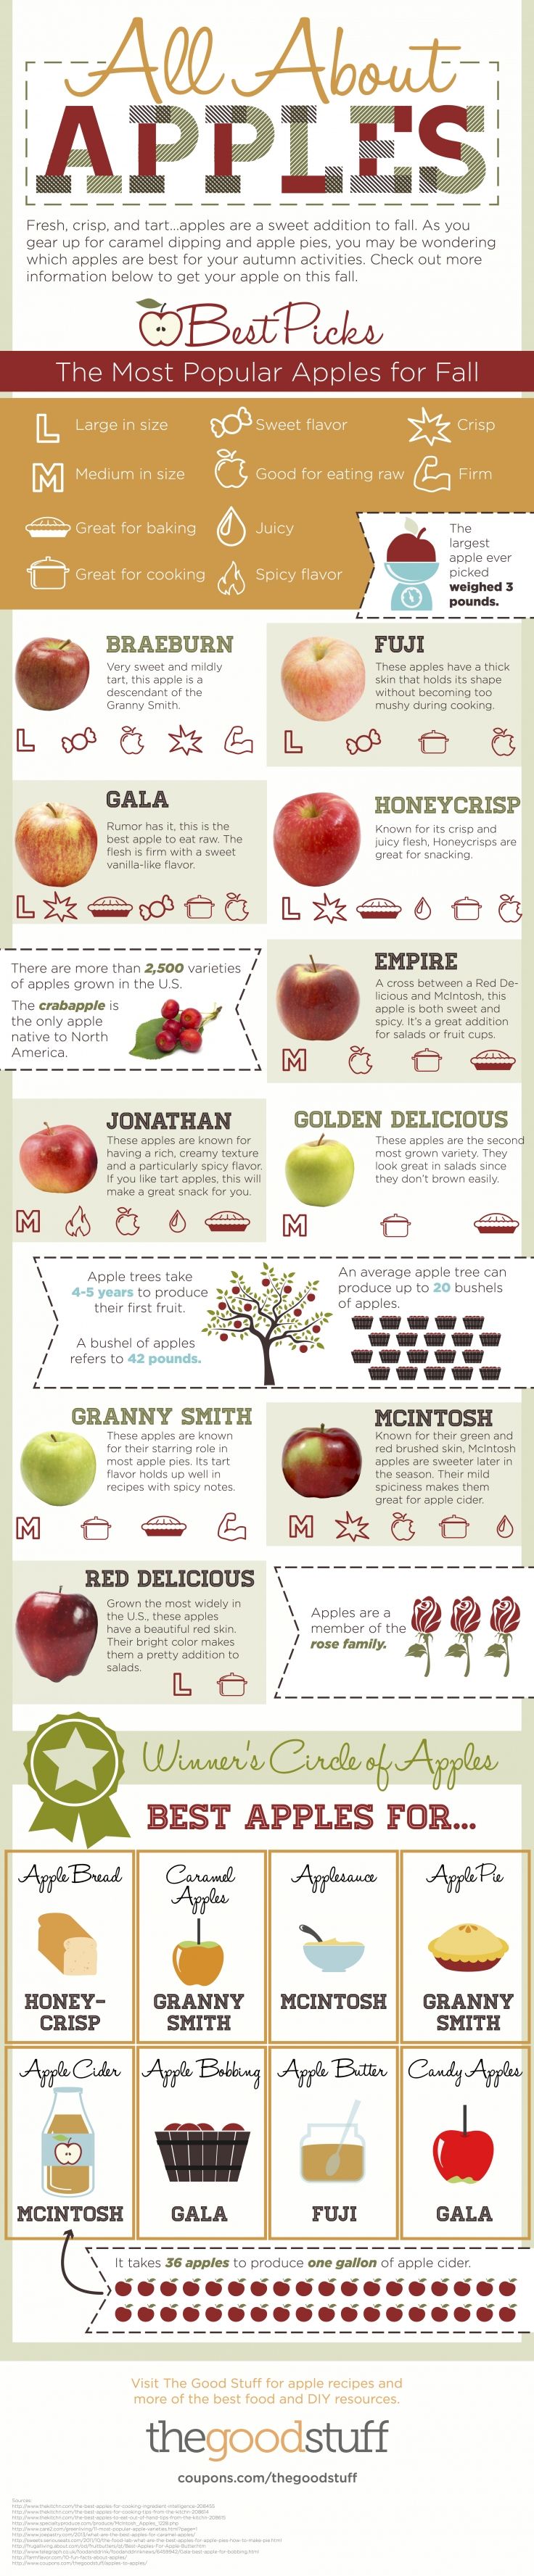 All About Apples: The Best Types of Apples For Your Recipes (Infographic)